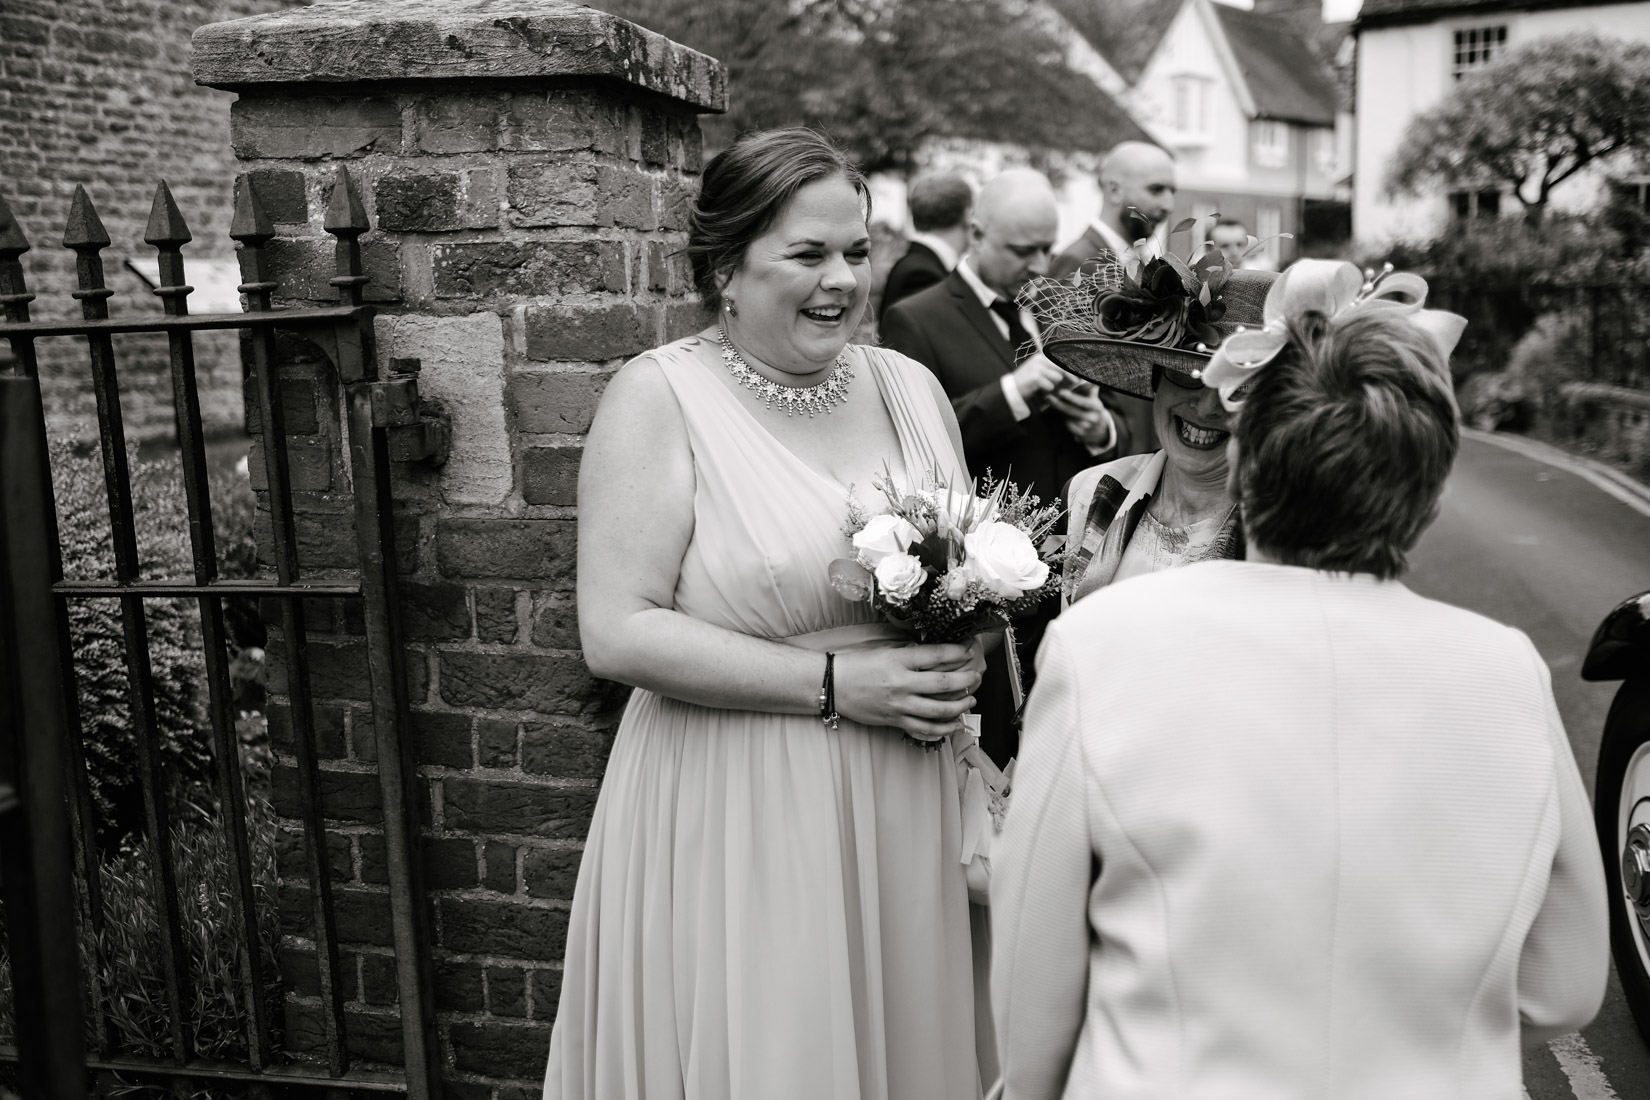  The wedding of Charlie and Pete, at St. Leonard's church and Lains Barn, Wantage 